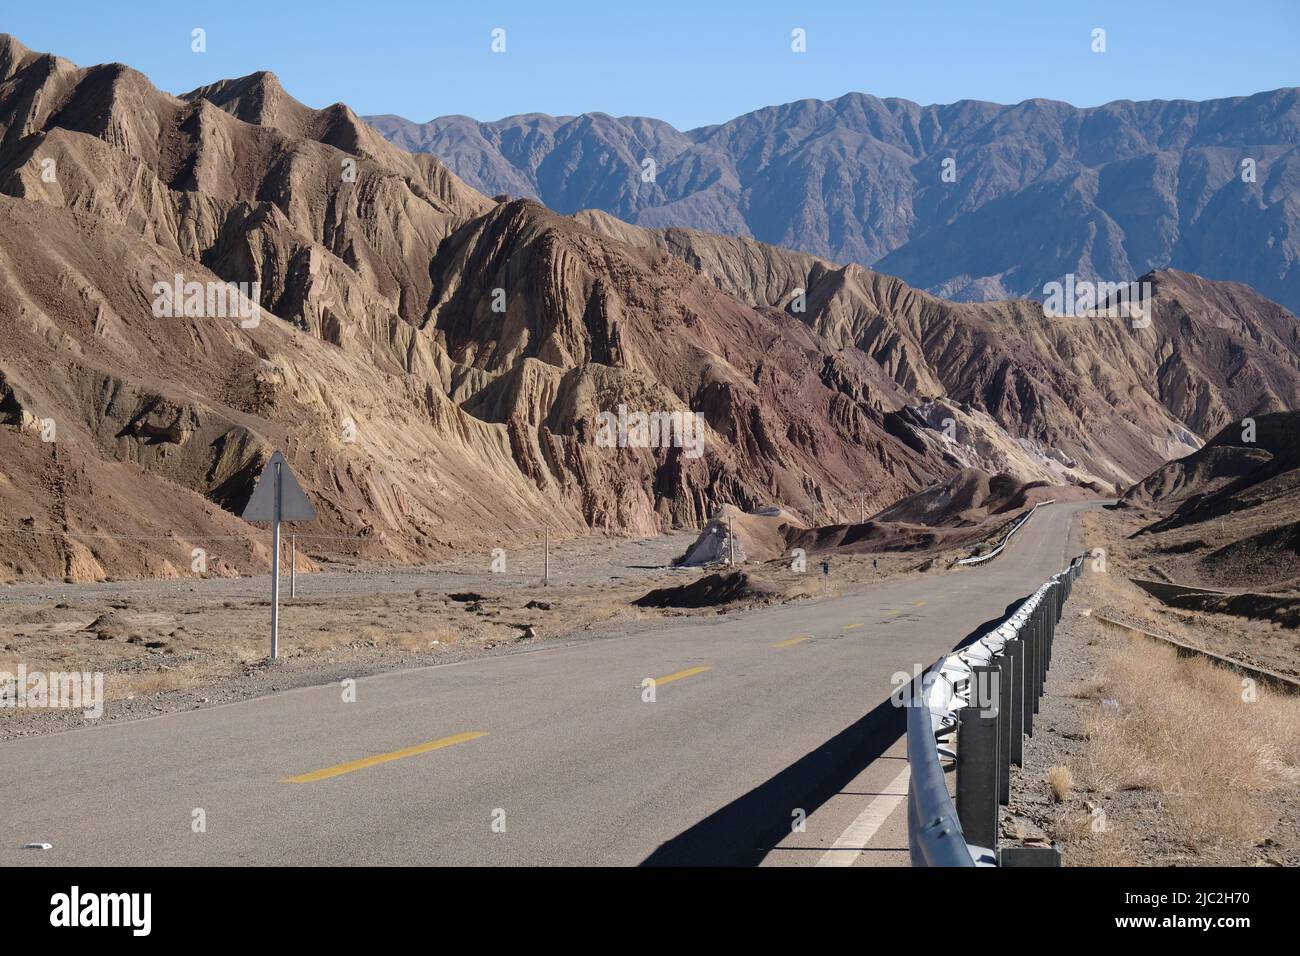 Road in Iran's mountains Stock Photo